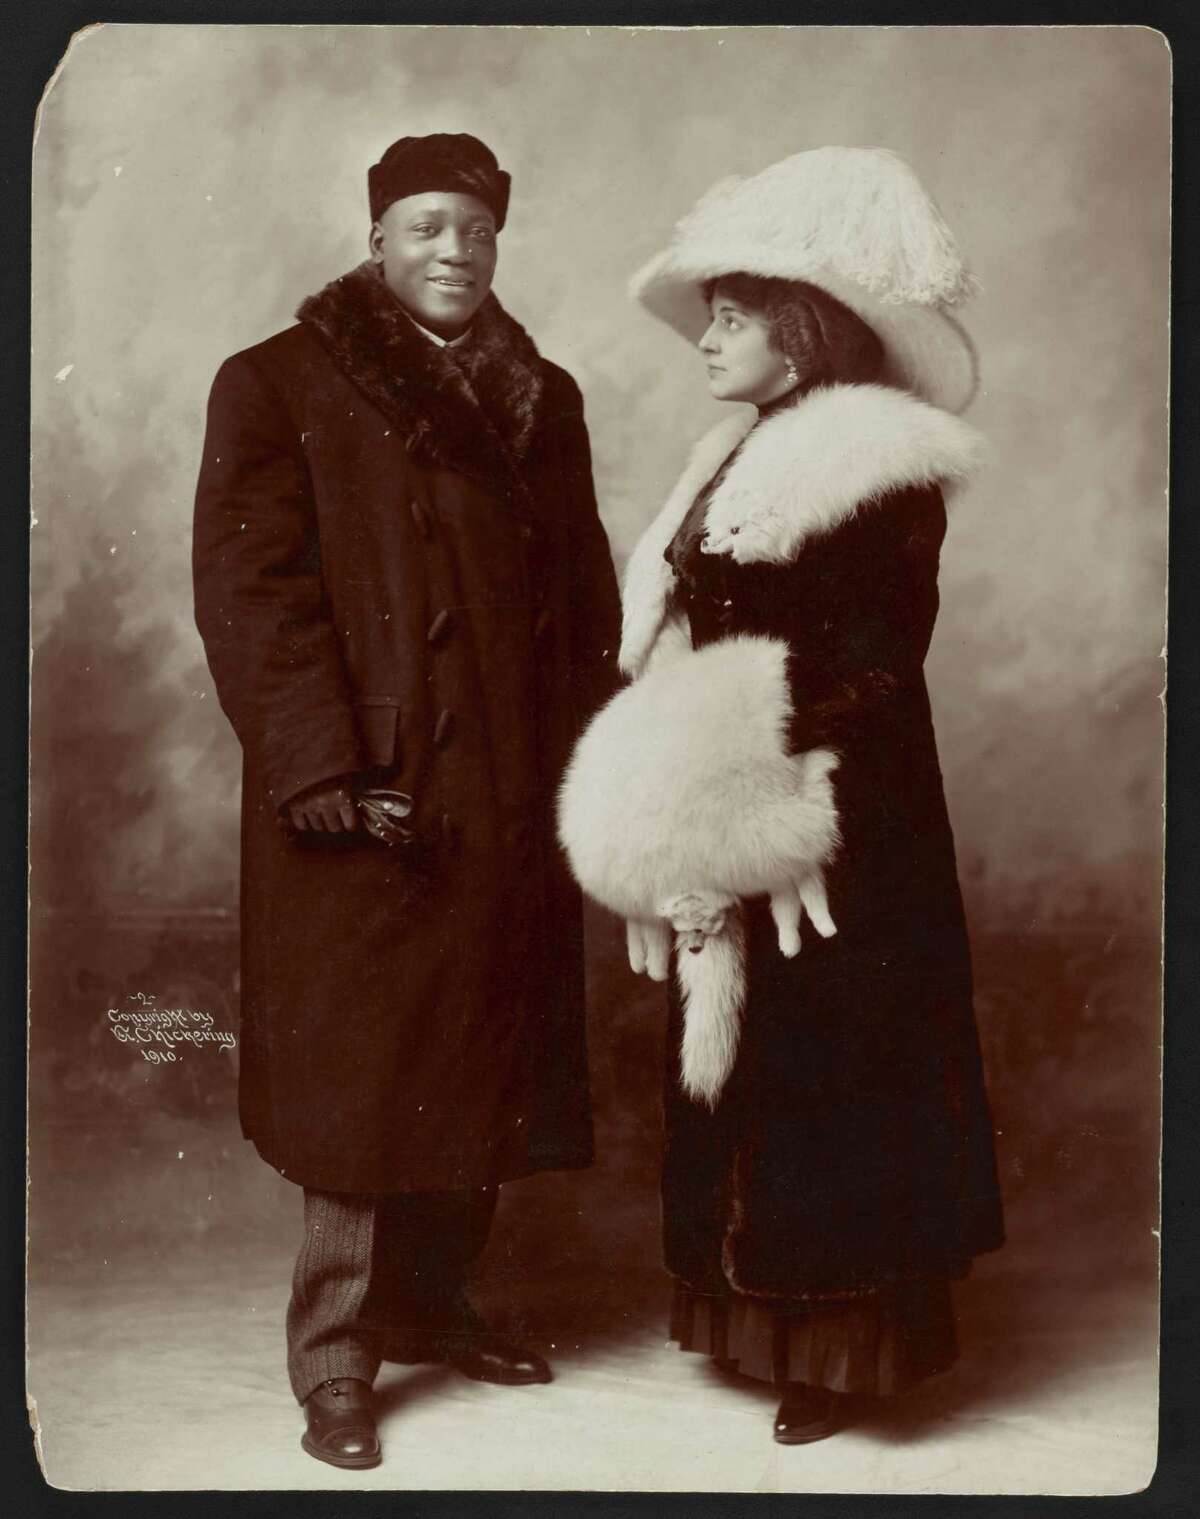 Boxing champion Jack Johnson and his first wife, Etta. Interracial relationships were — at best — frowned upon in that era.